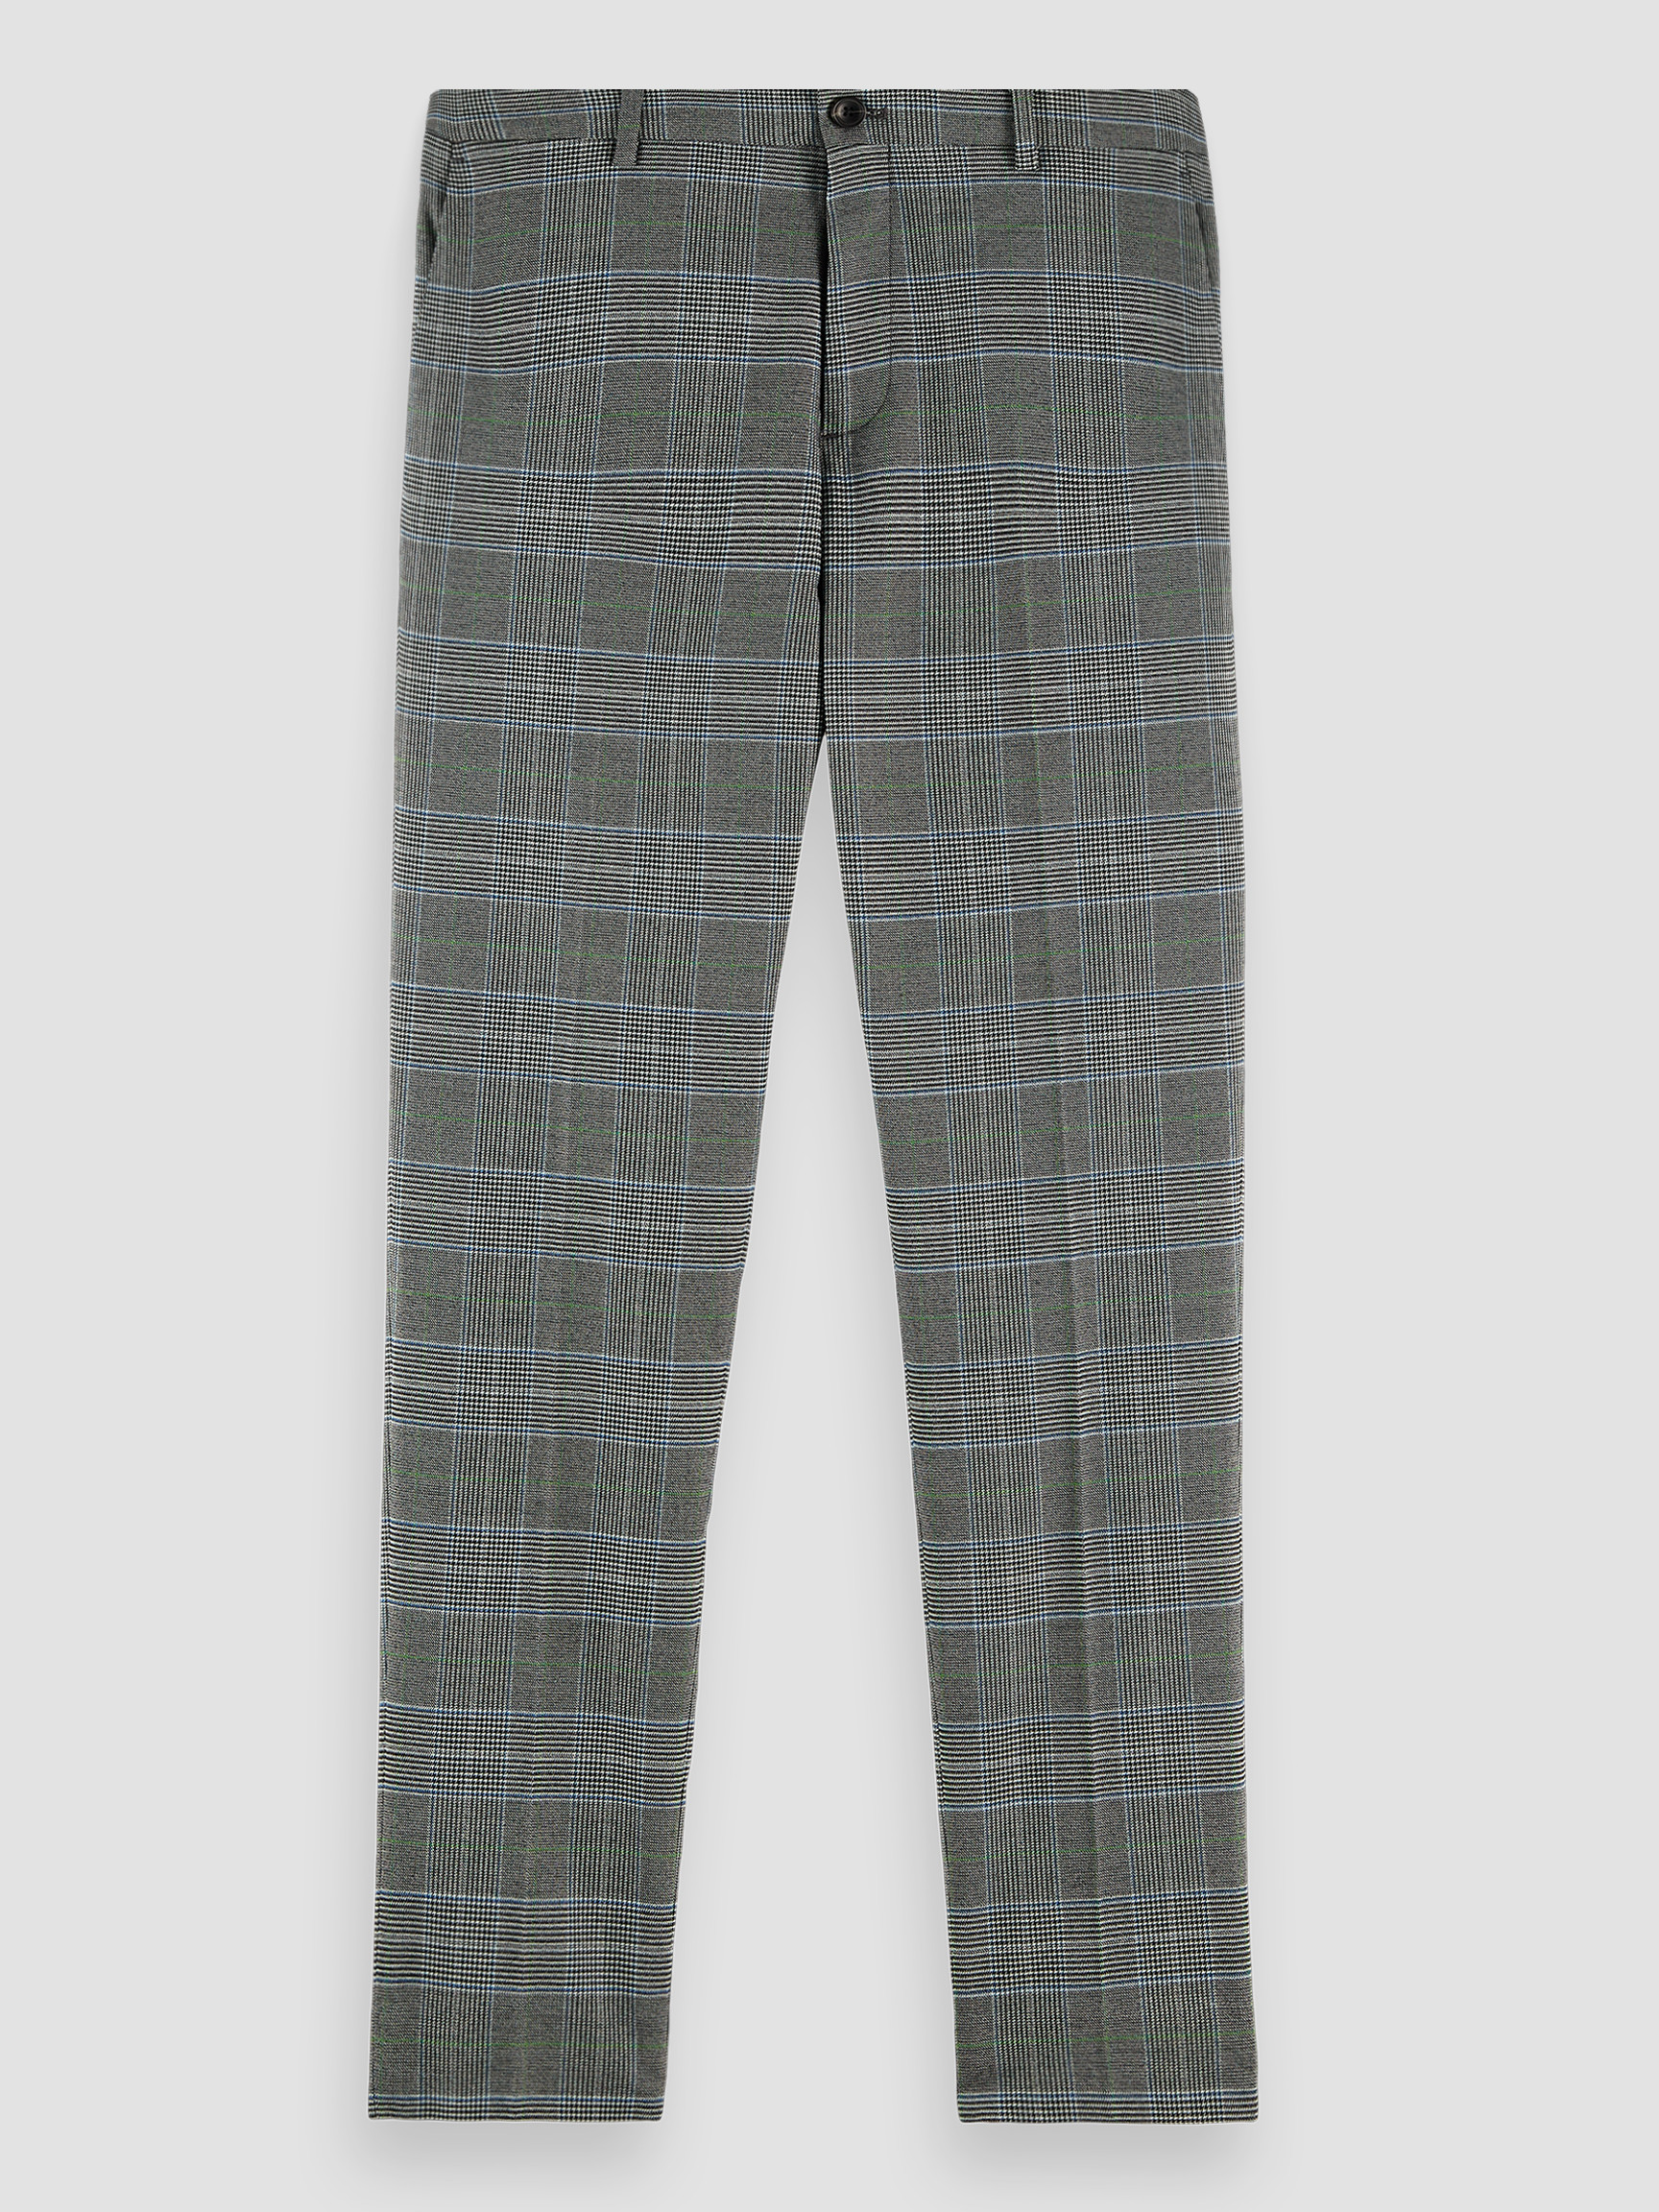 Men Formal Trousers Code By Lifestyle Scotch Soda - Buy Men Formal Trousers  Code By Lifestyle Scotch Soda online in India